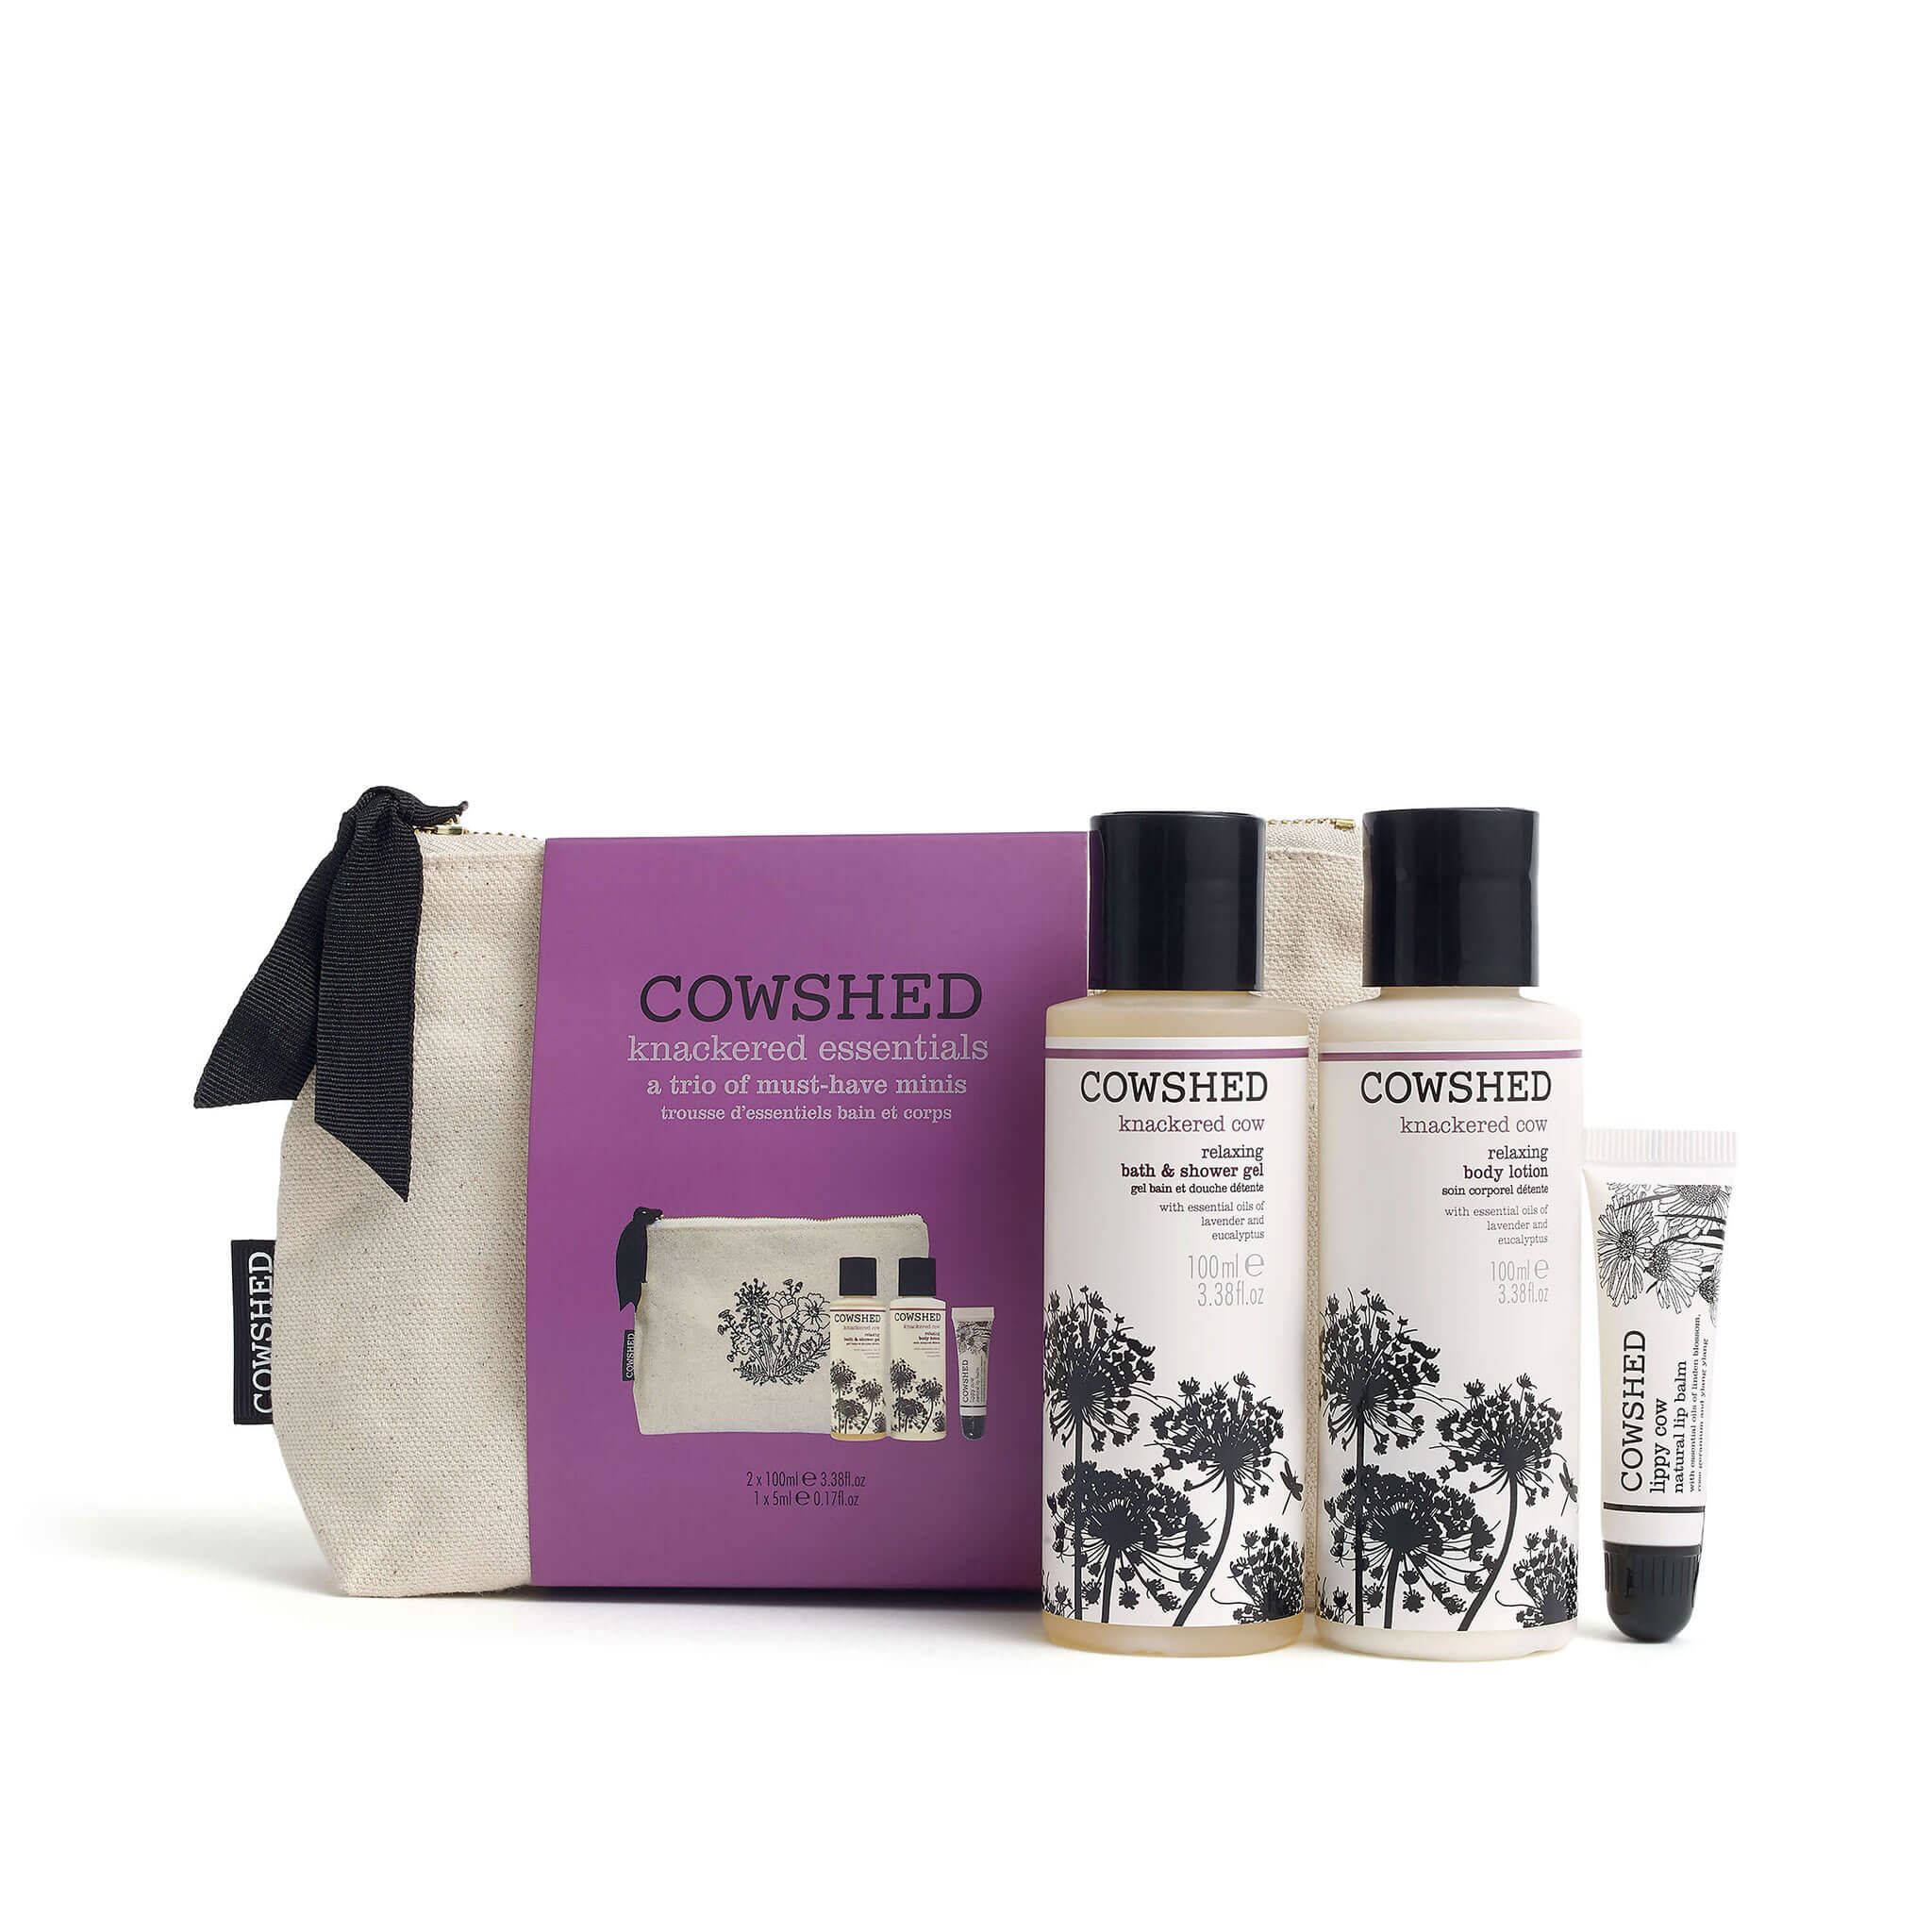 Win a Cowshed Knackered Essentials Kit